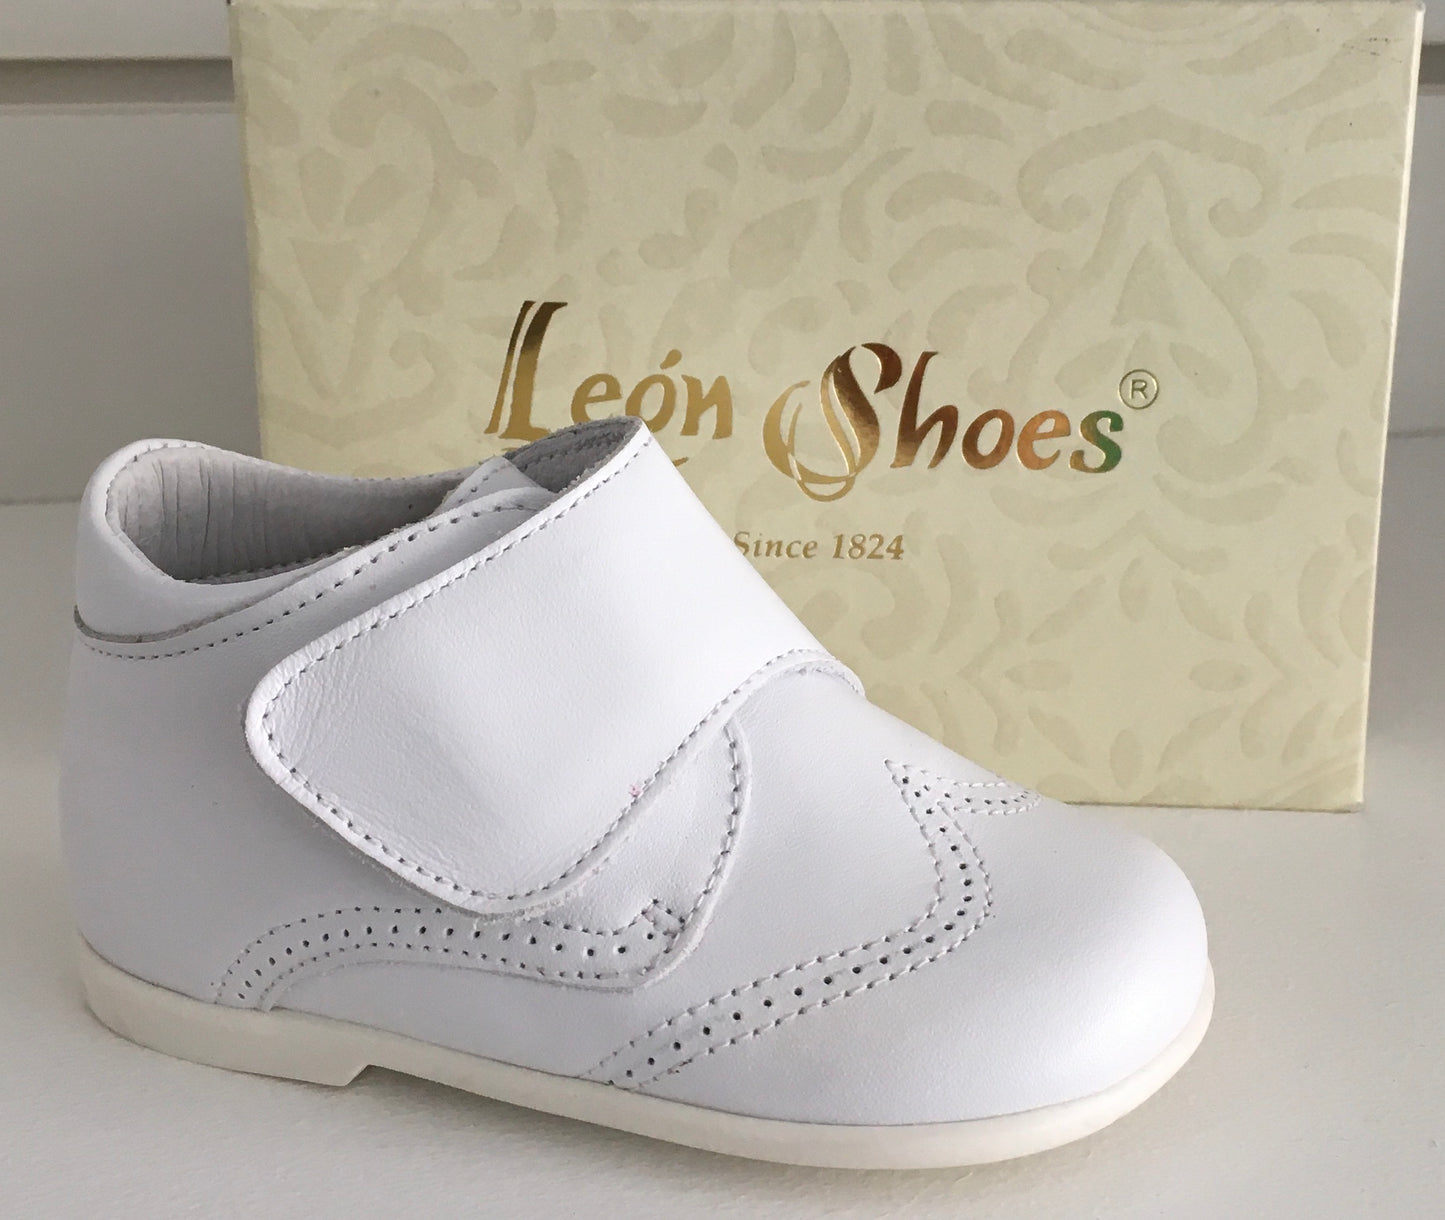 Leon Shoes Boots in White or Blue